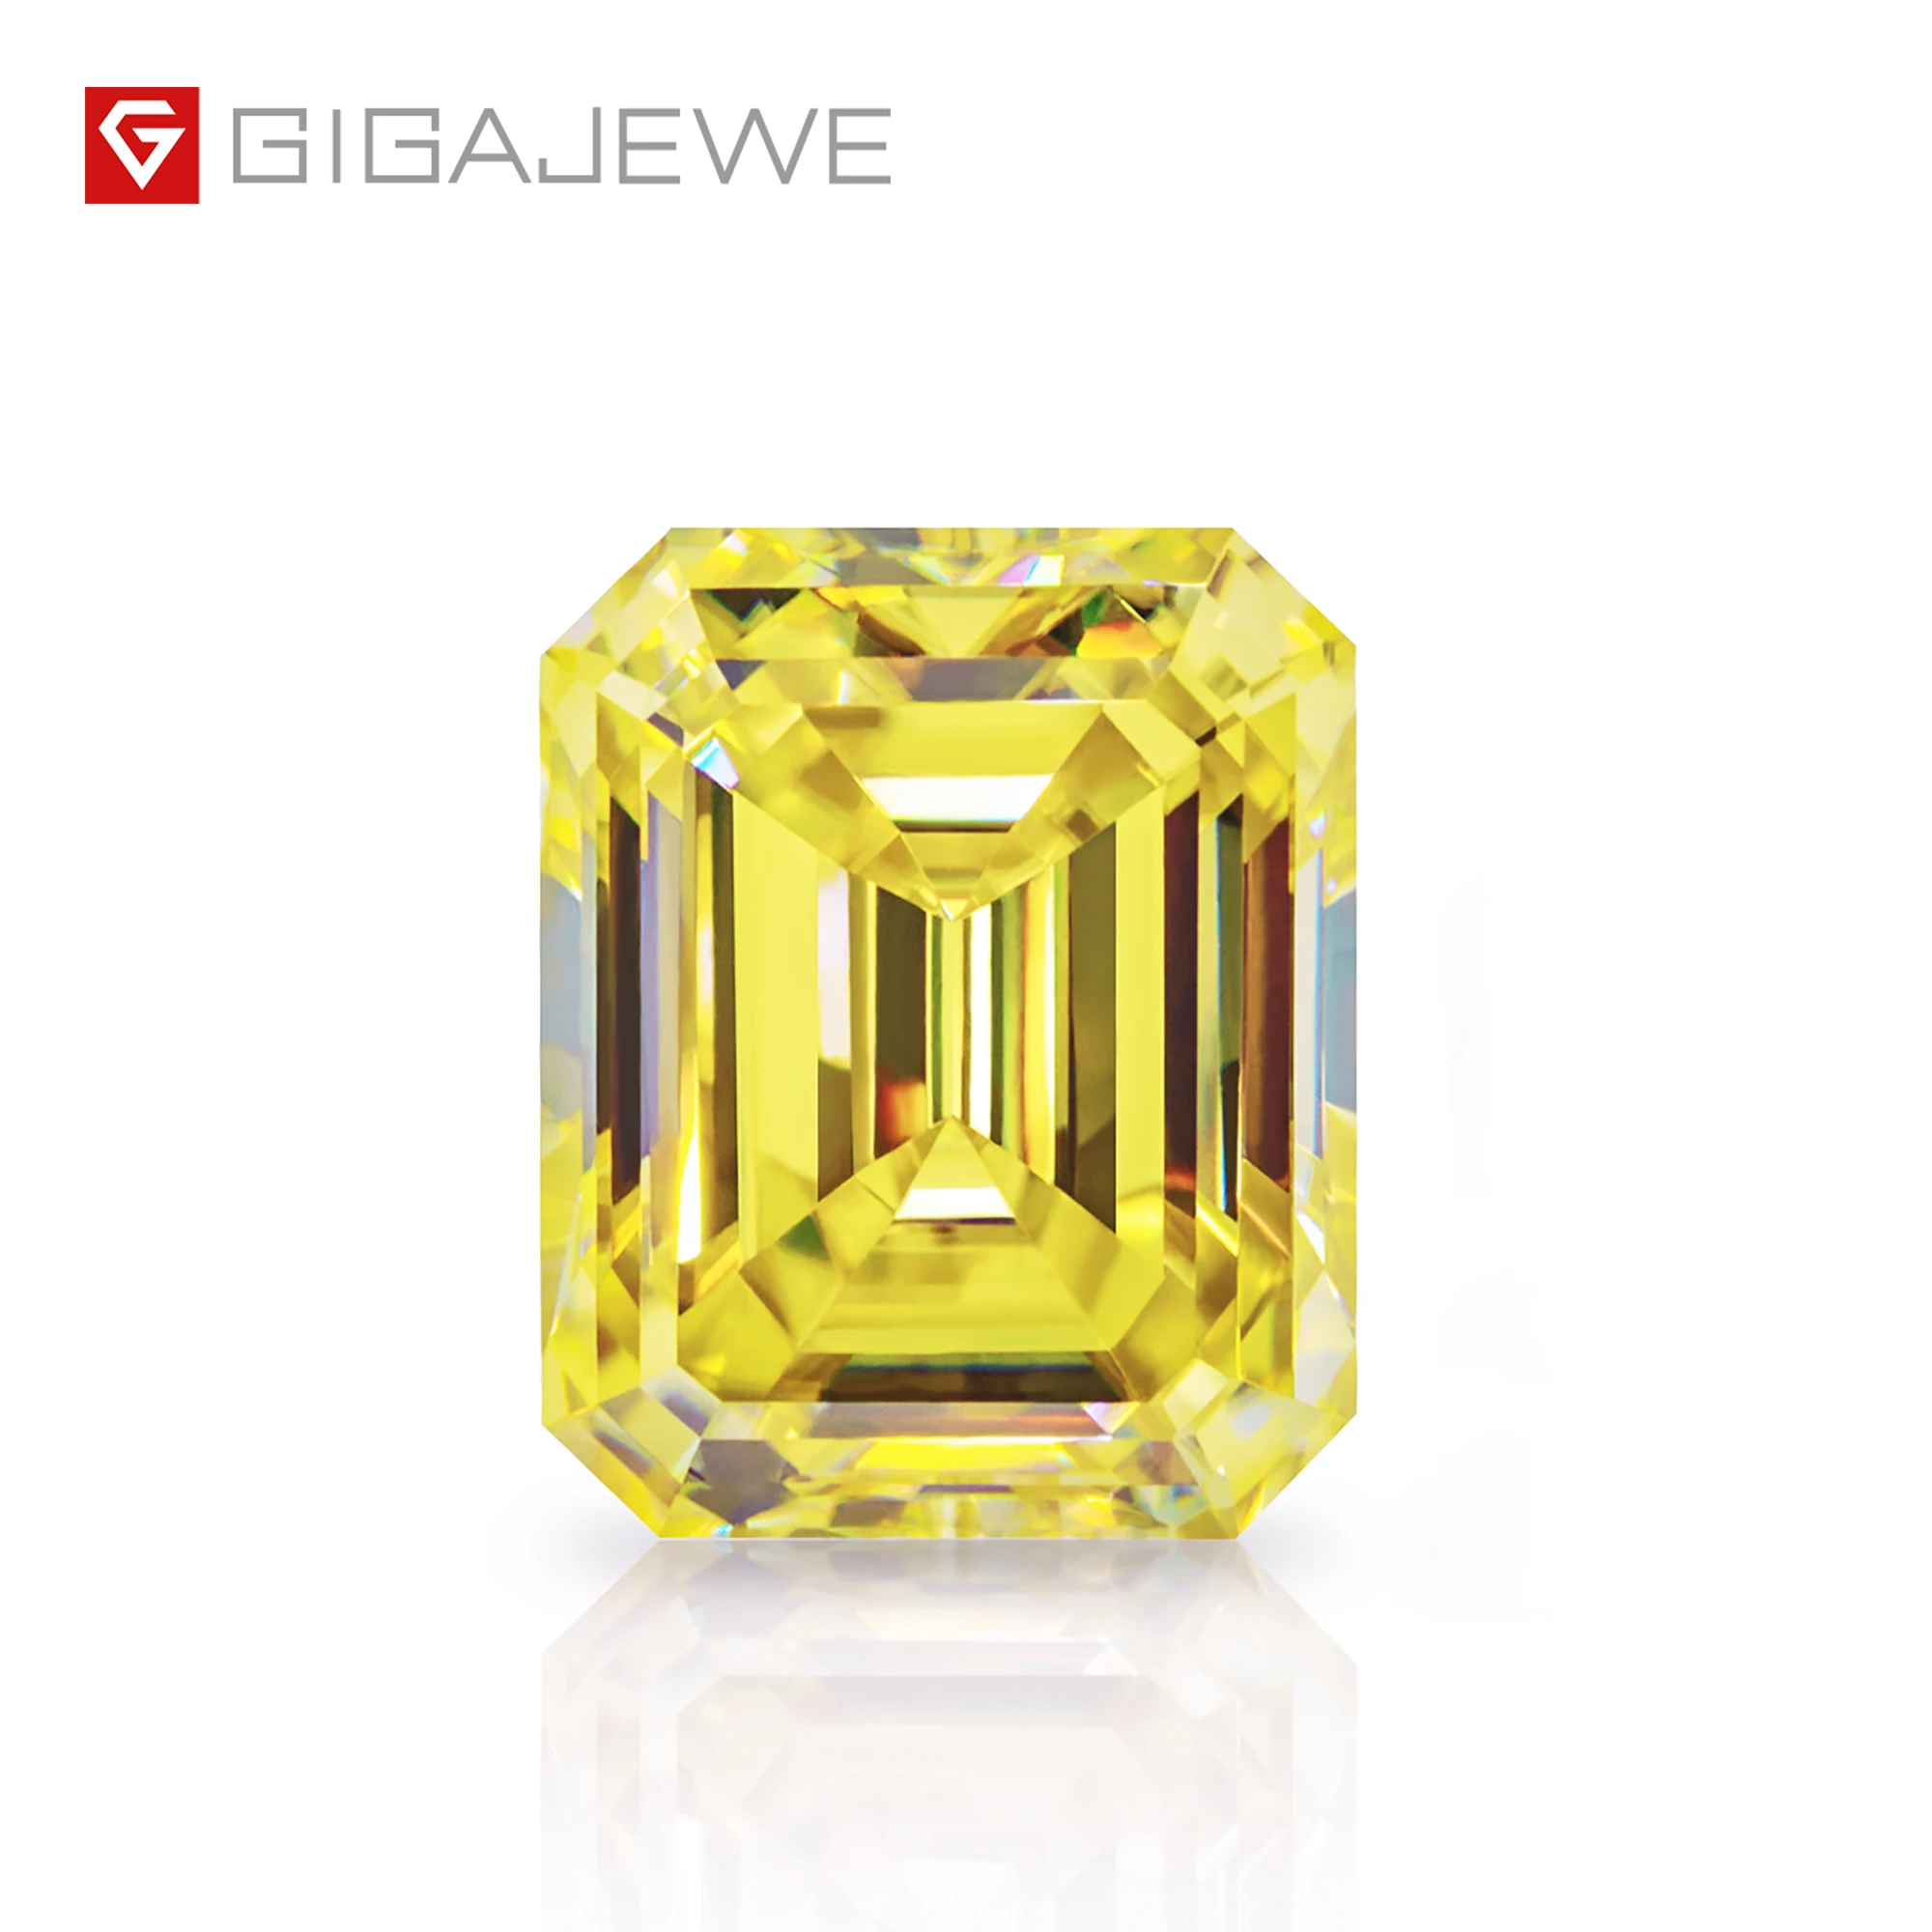 

GIGAJEWE Vivid Yellow Emerald Cut Moissanite Vvs1 clarity with GRA Certificate for jewelry making